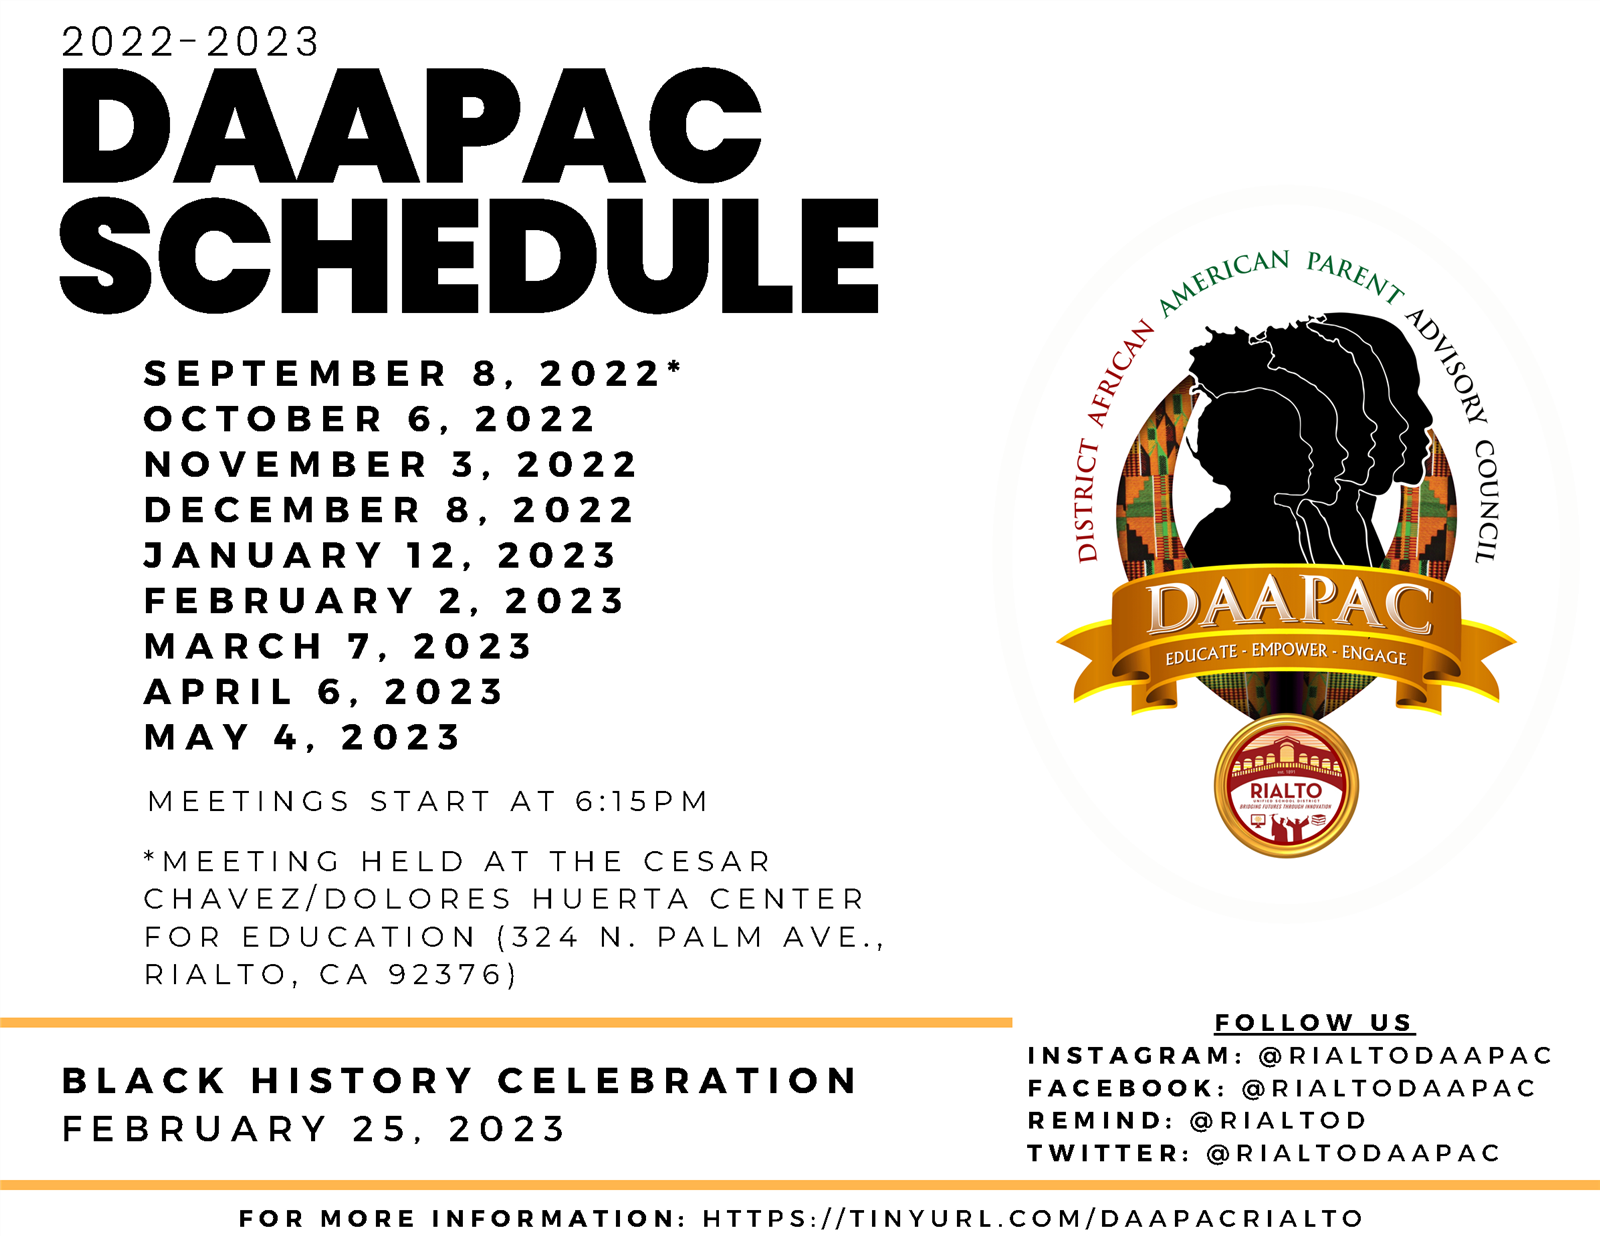 DAAPAC Schedule Podcaster 2022-2023